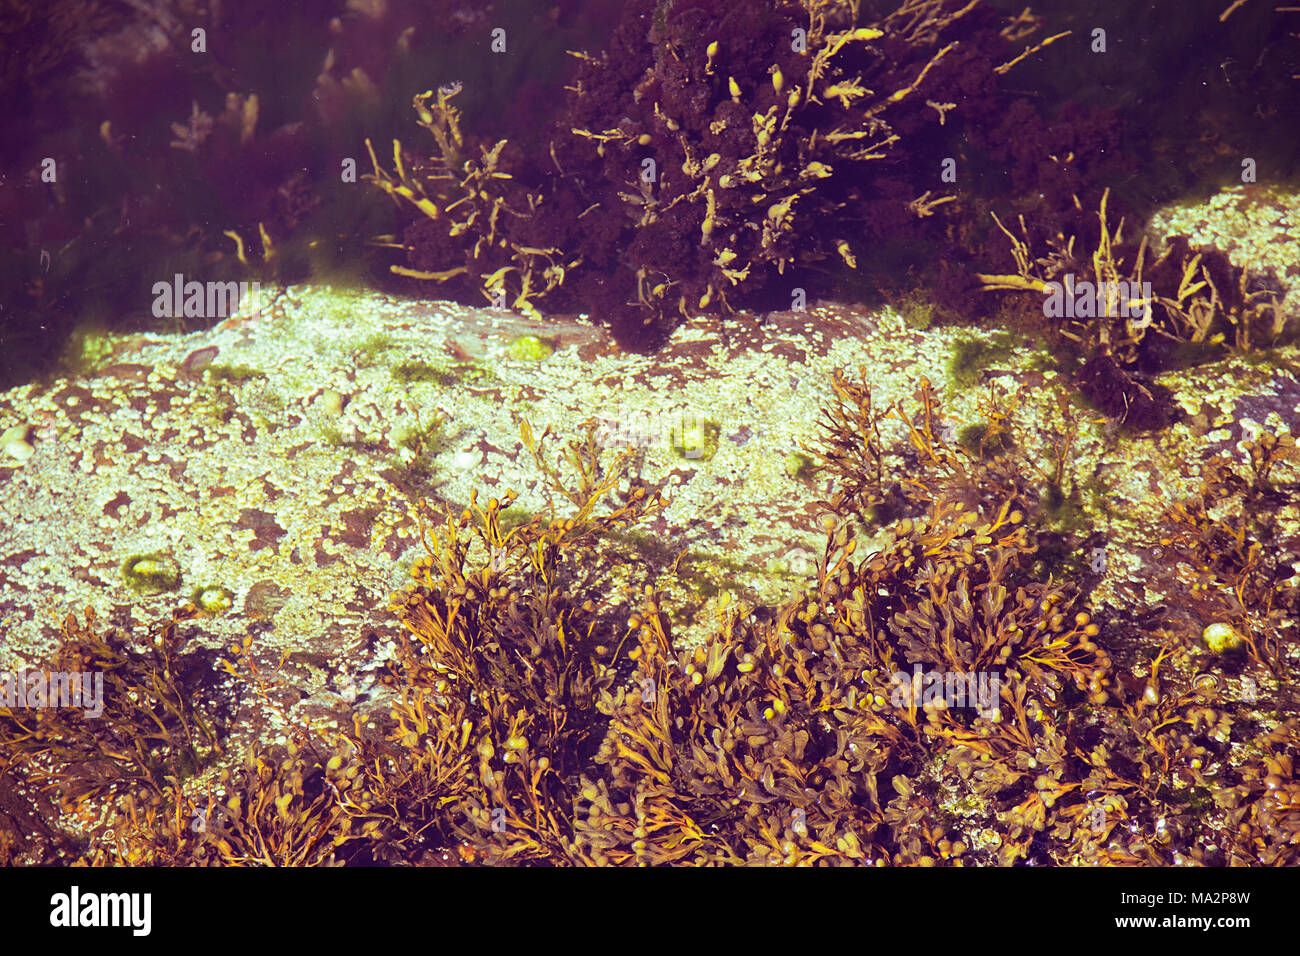 seaweed in shallow water seen from above the surface Stock Photo